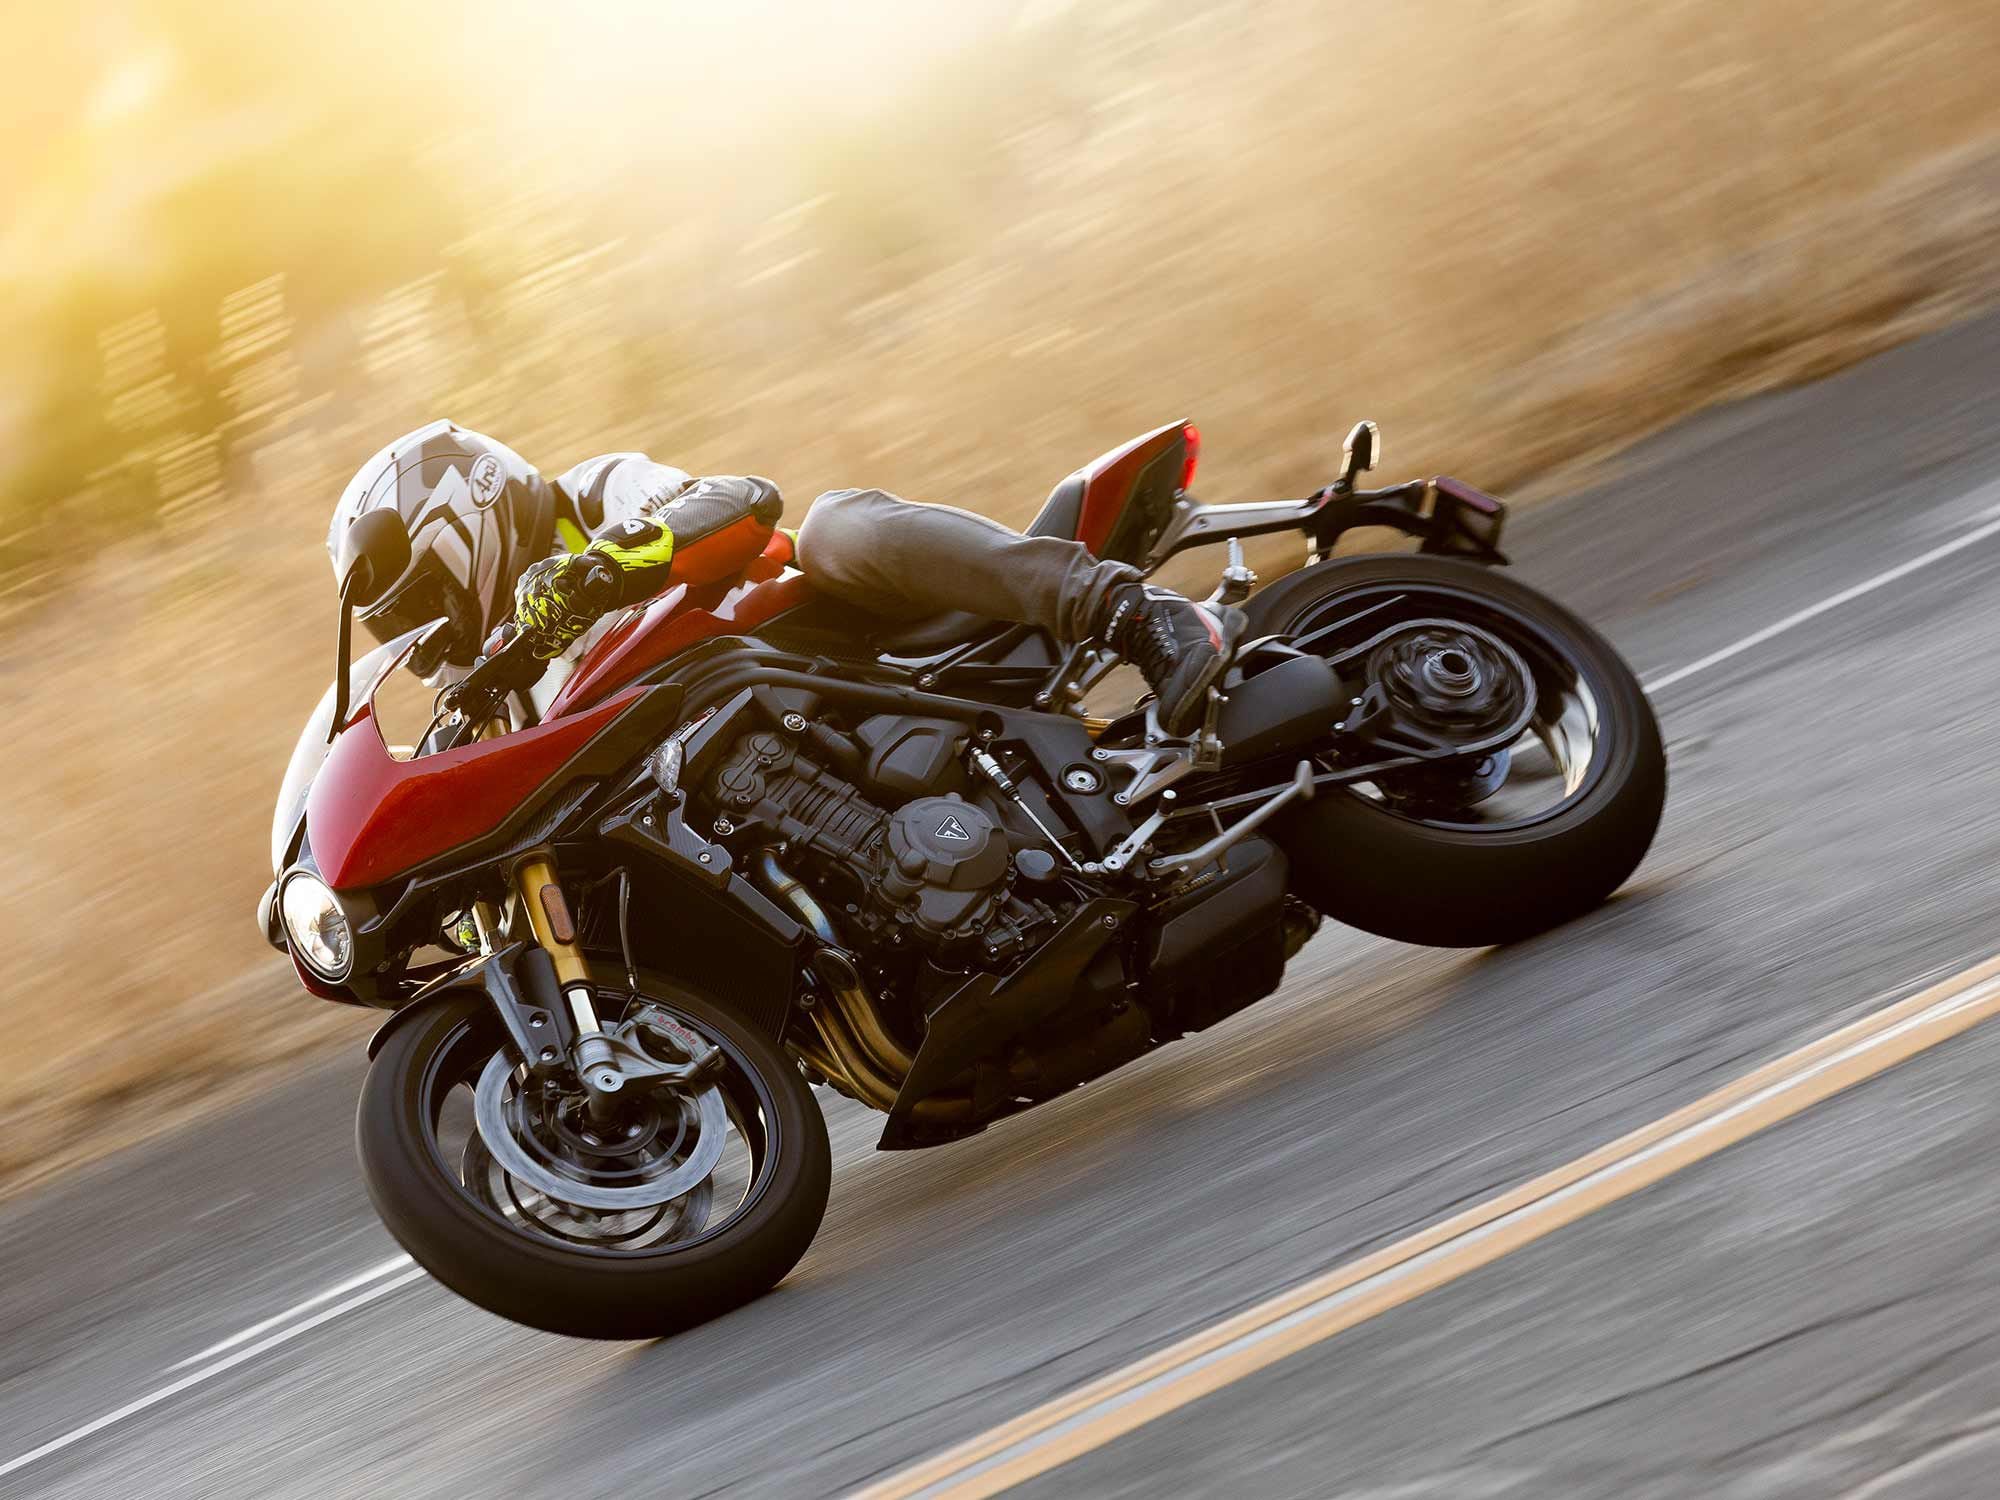 Triumph Speed Triple 1200 RR adds more style and tech to an already impressive motorcycle.